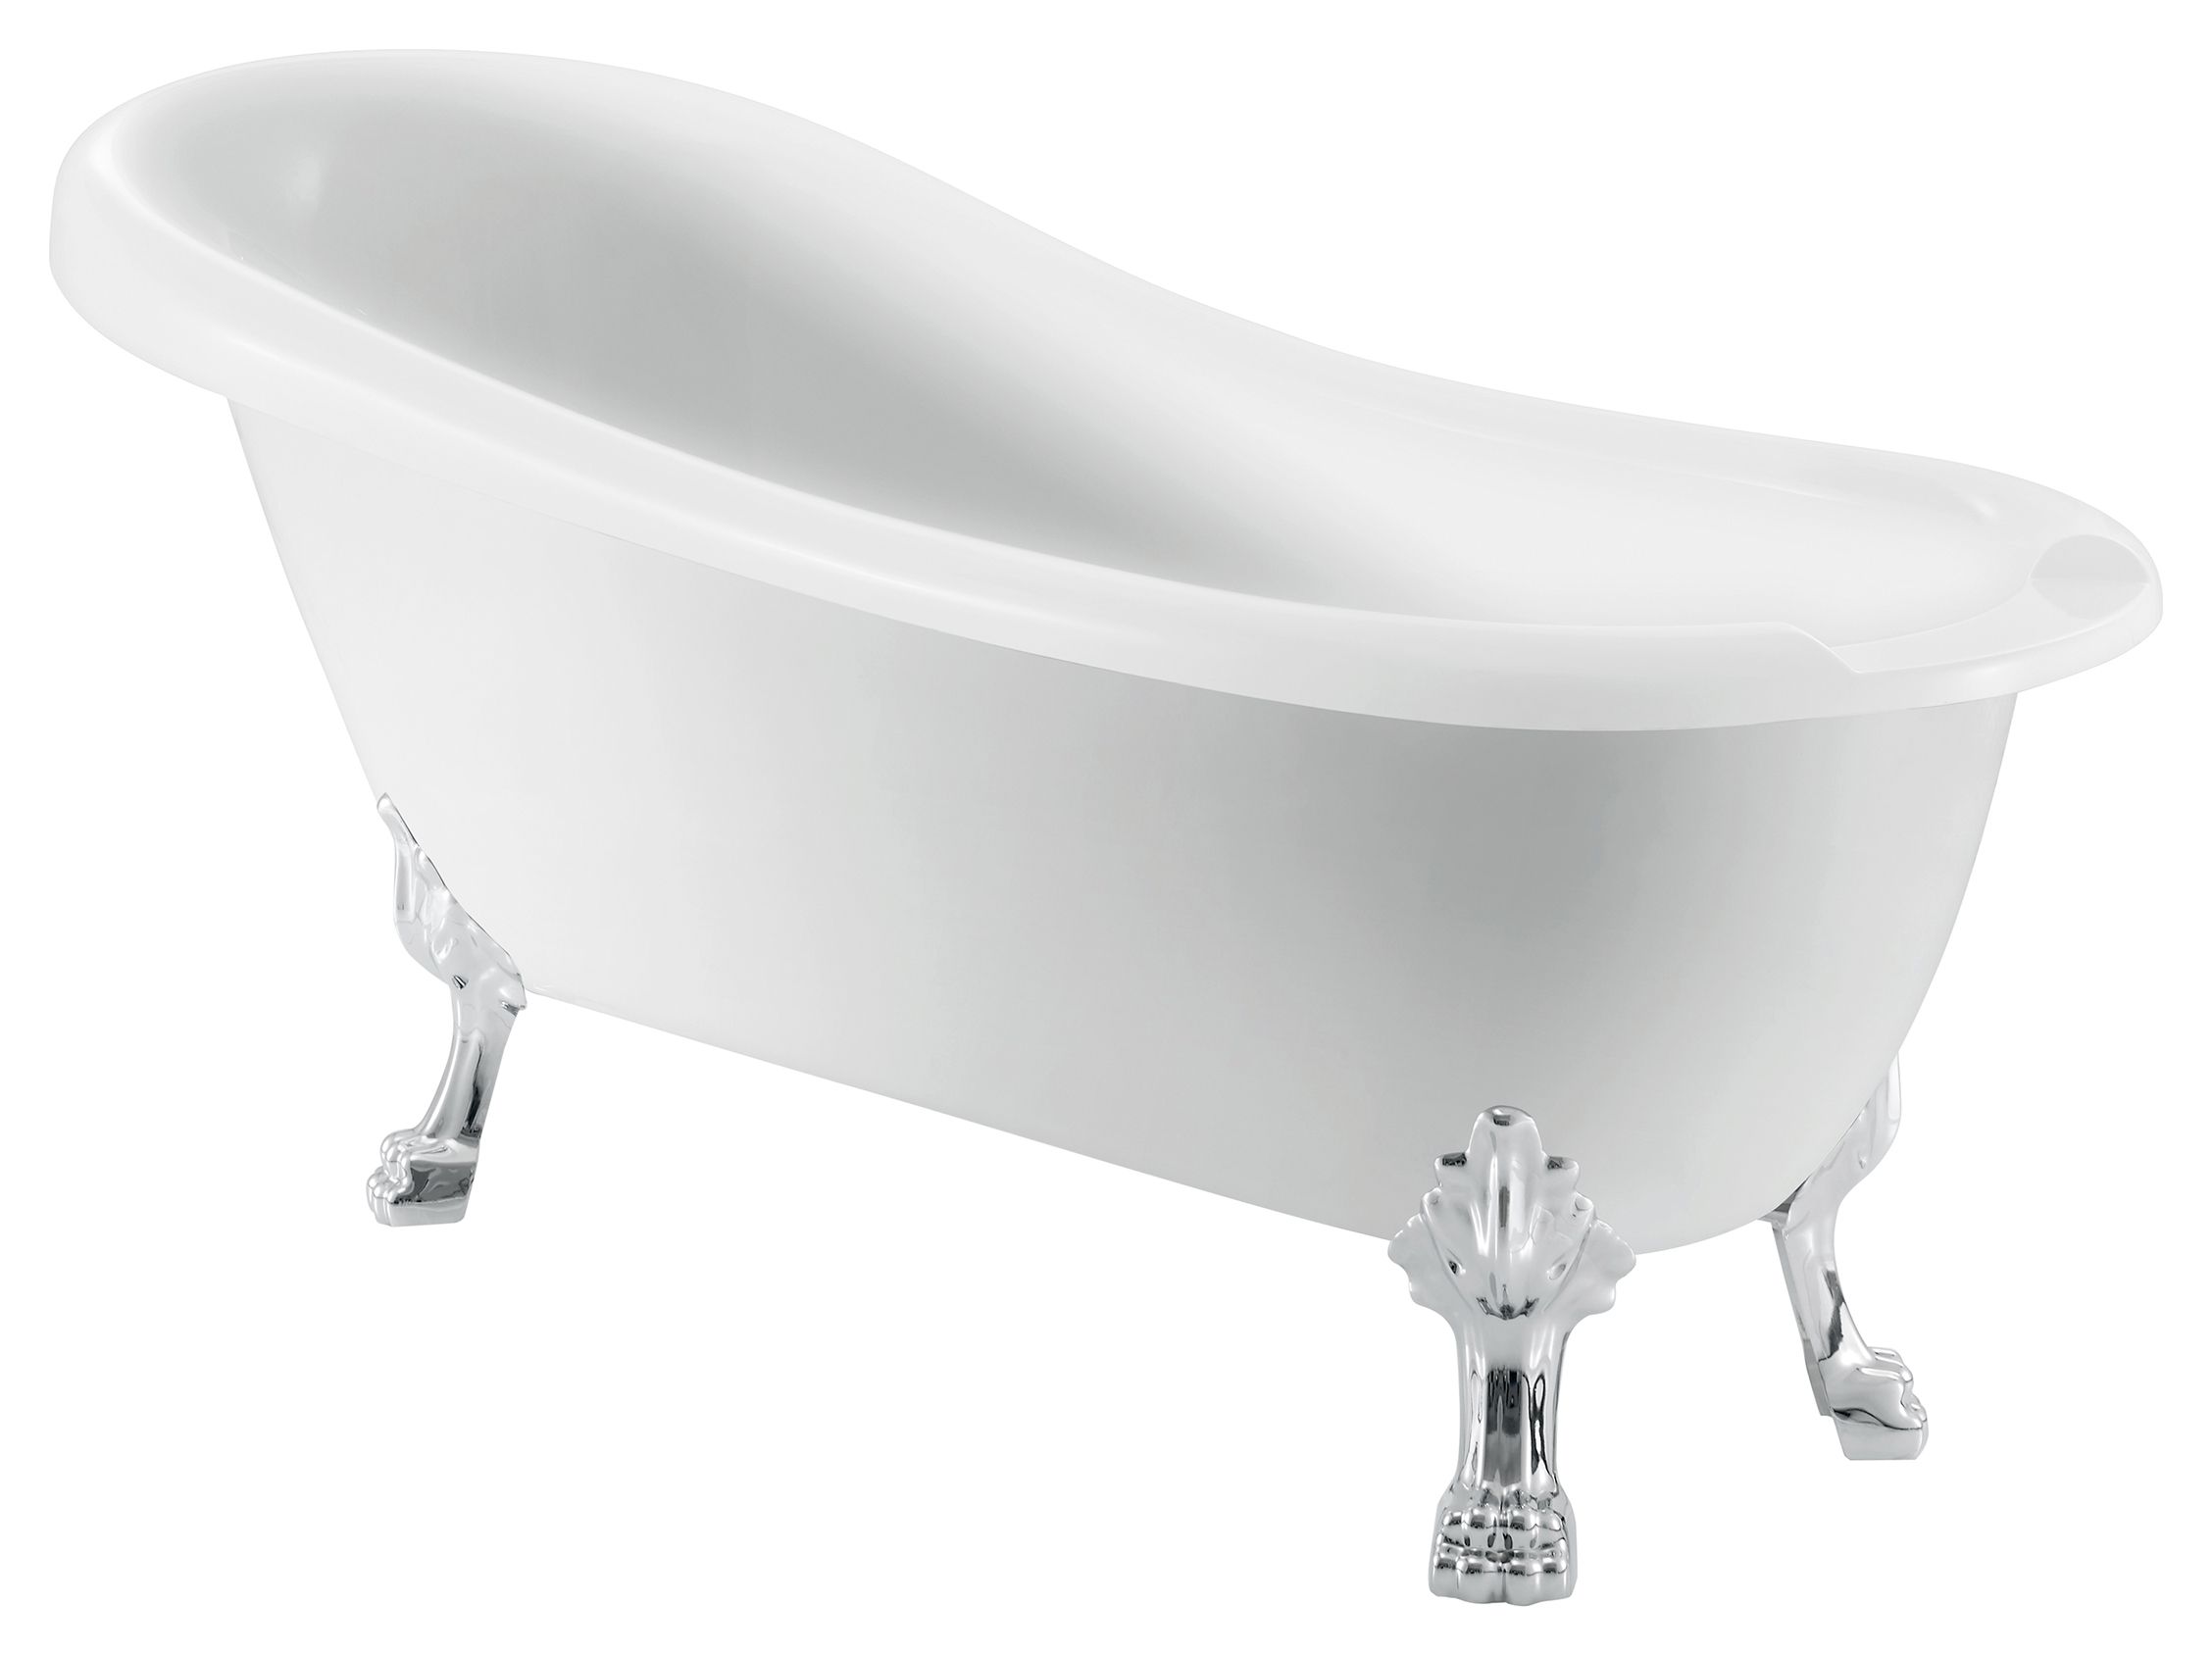 Image of Wickes Bombay Freestanding Traditional Single Ended Roll Top Slipper Bath - 1710 x 740mm